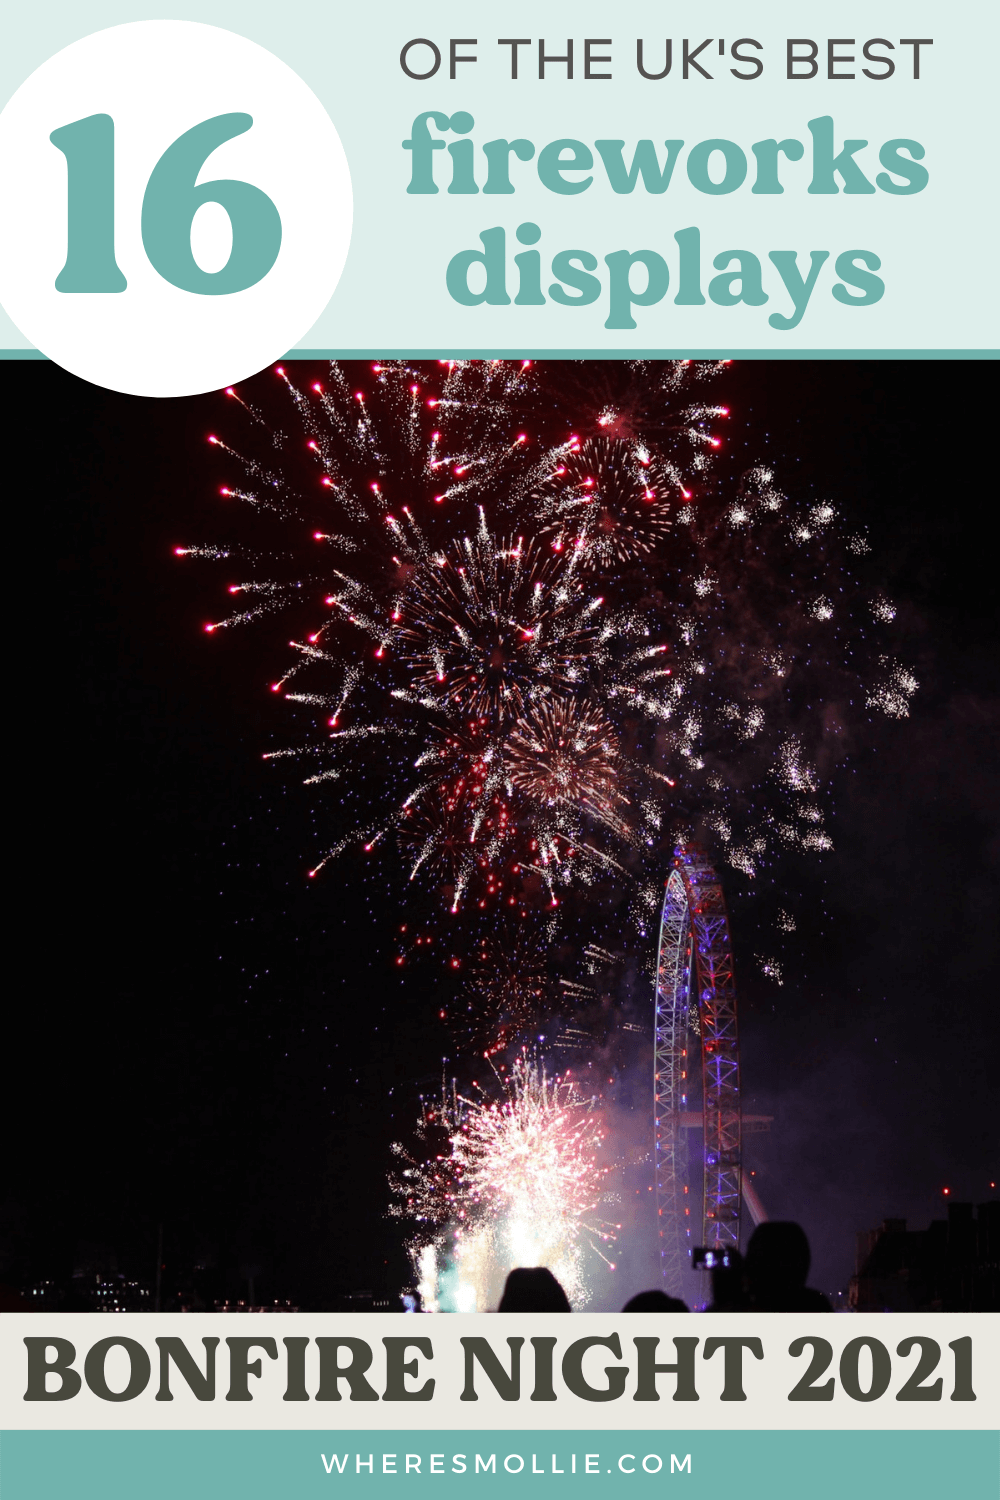 The best fireworks displays in the UK for Bonfire Night